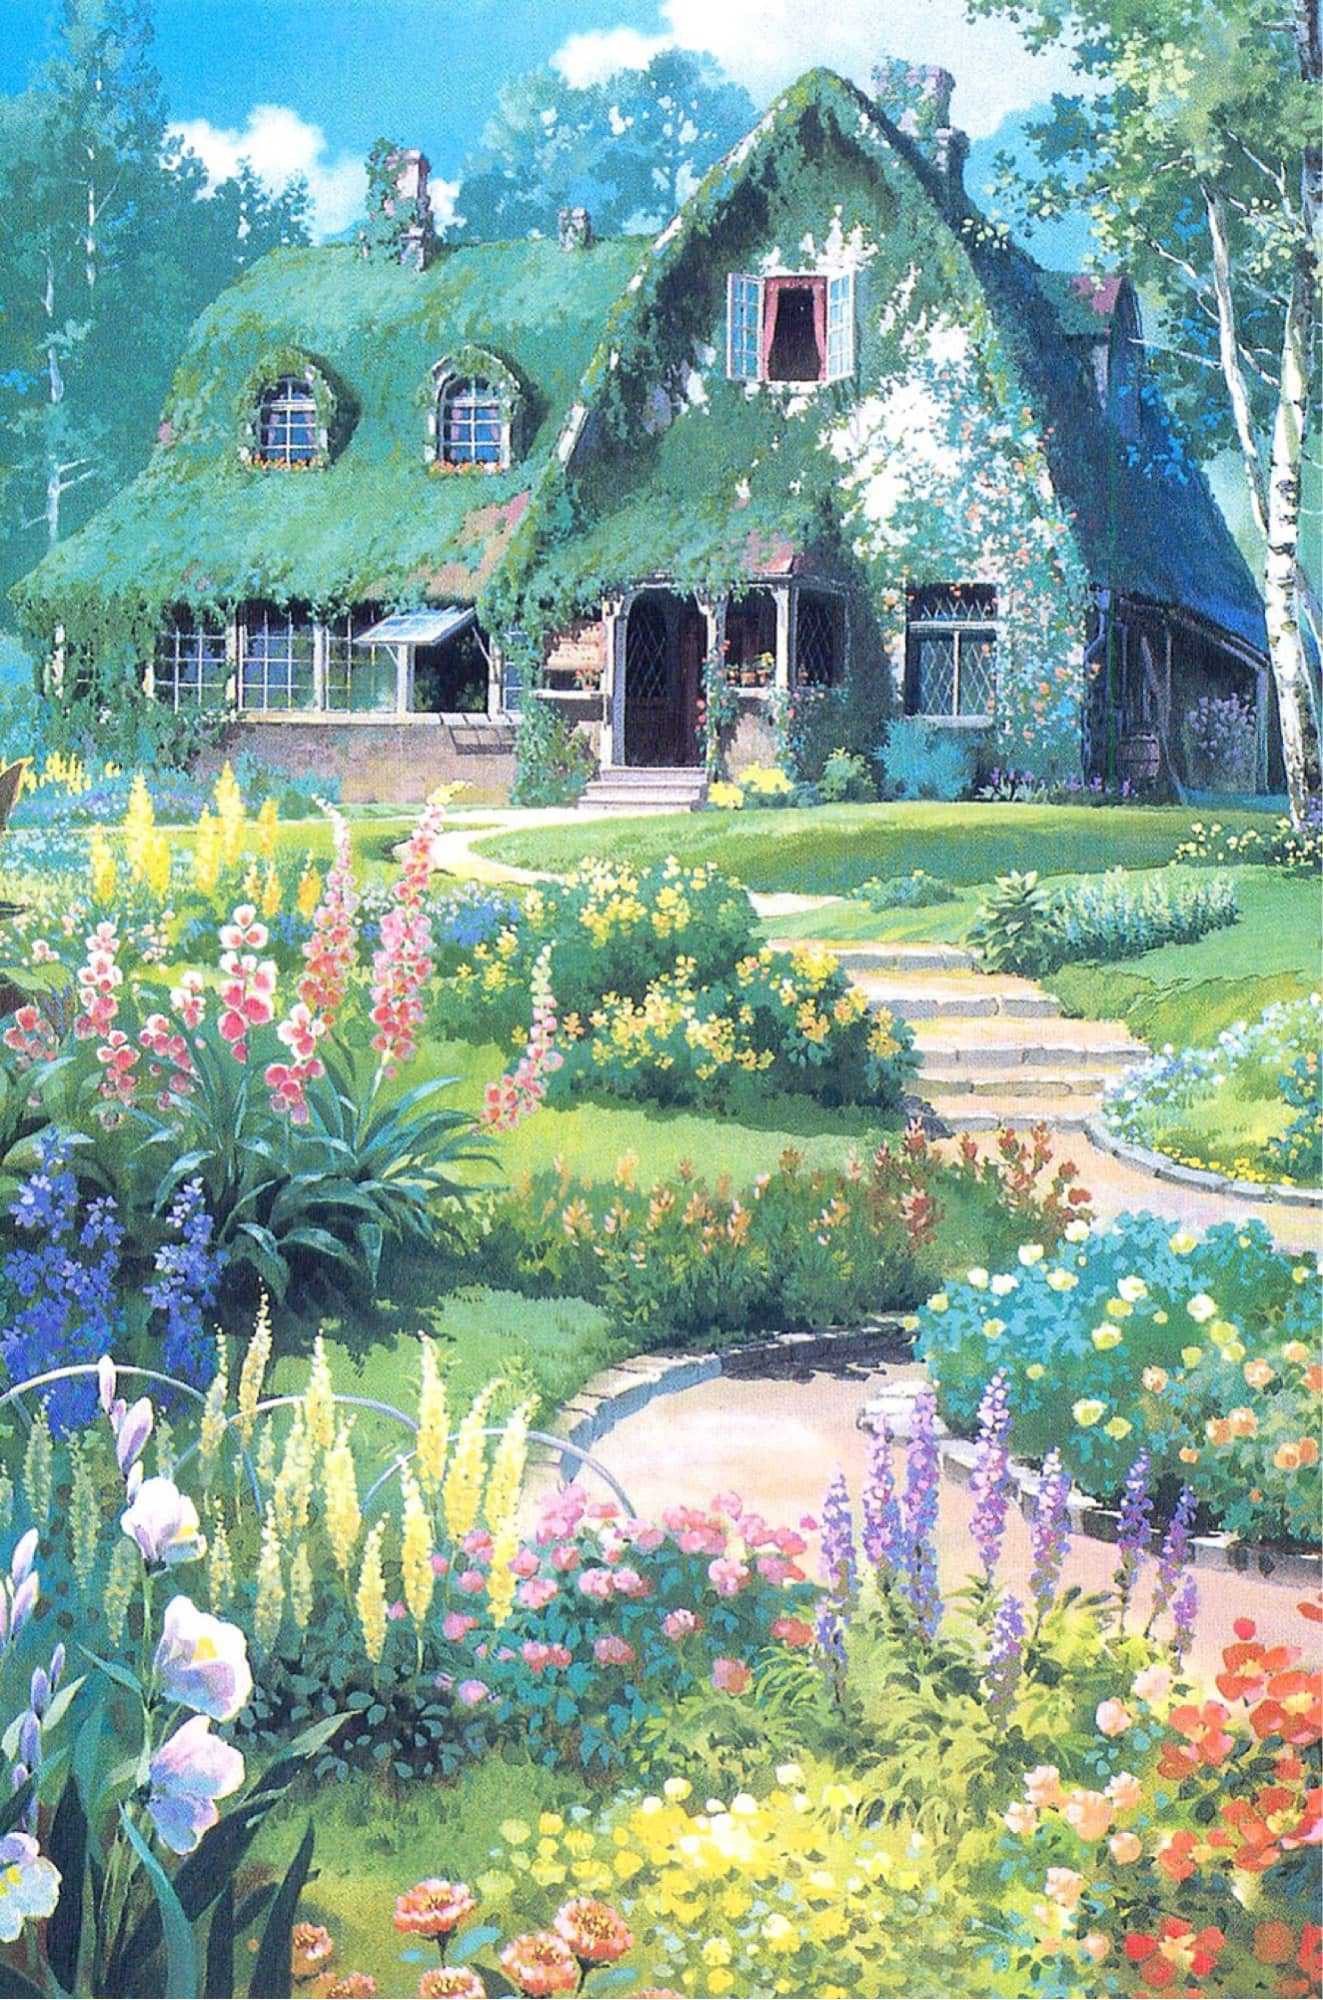 A painting of a house with a garden in front of it - Cottagecore